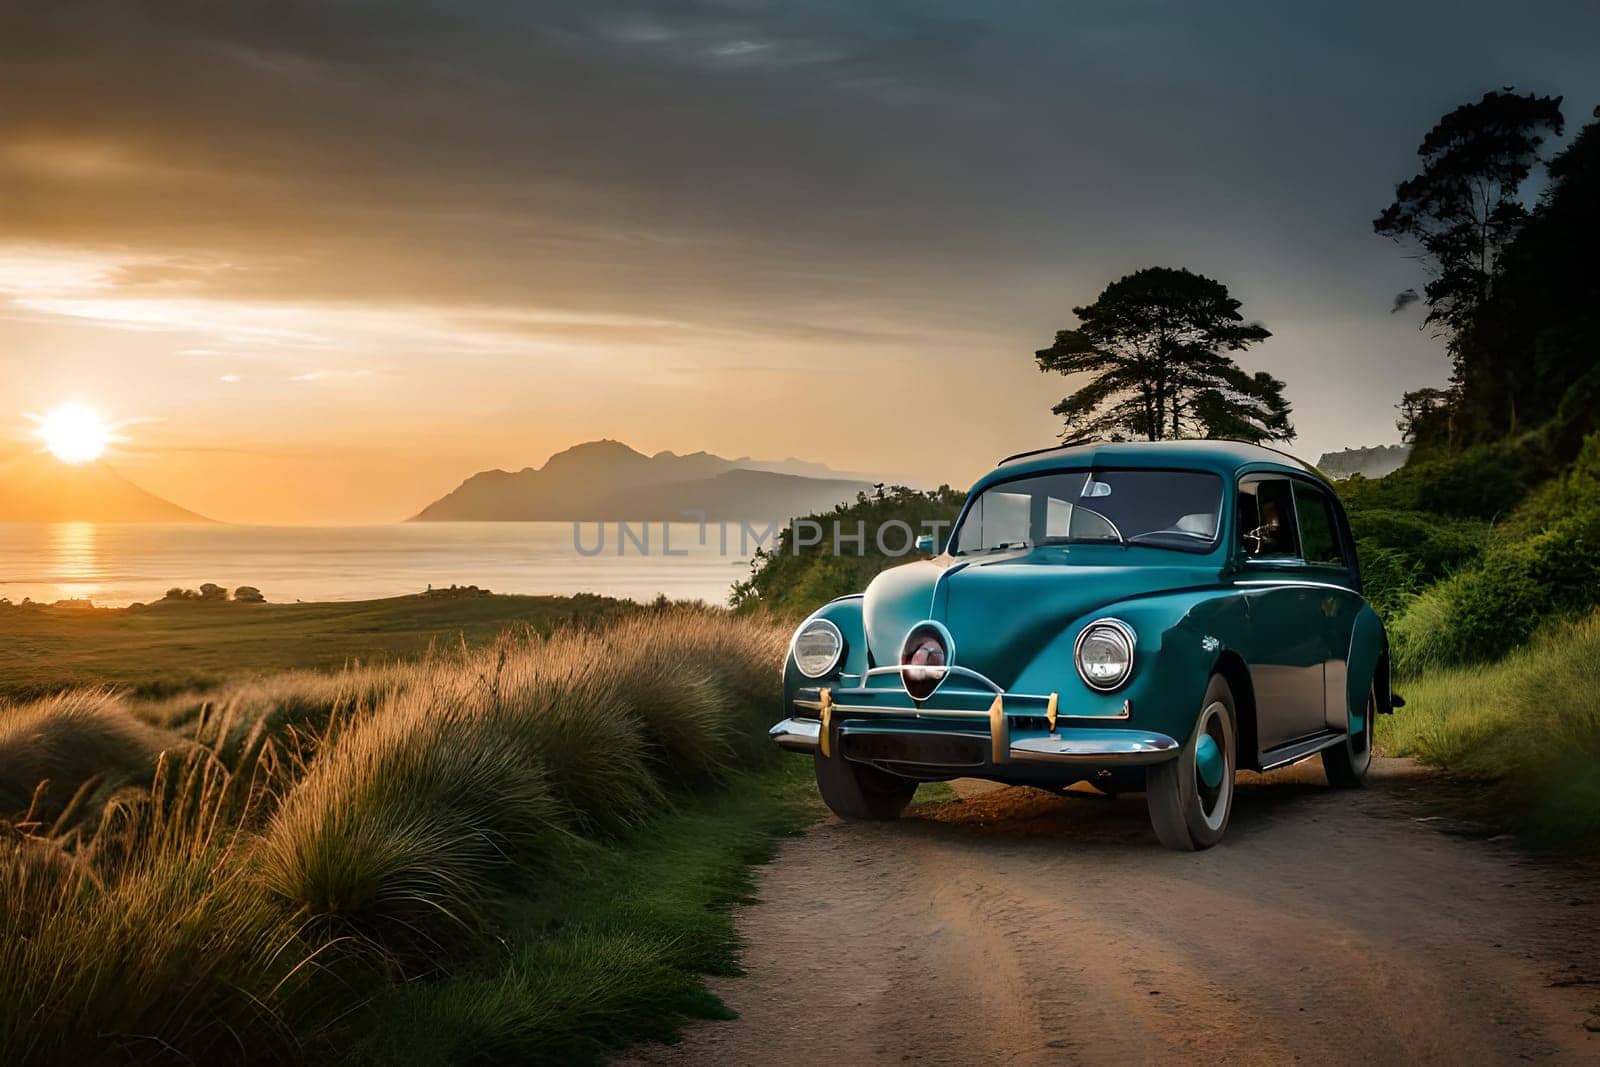 A blue car parked on a beach with a beach house in the background. A vintage car on a country road with a sunset in the background AI-generated Digital Art